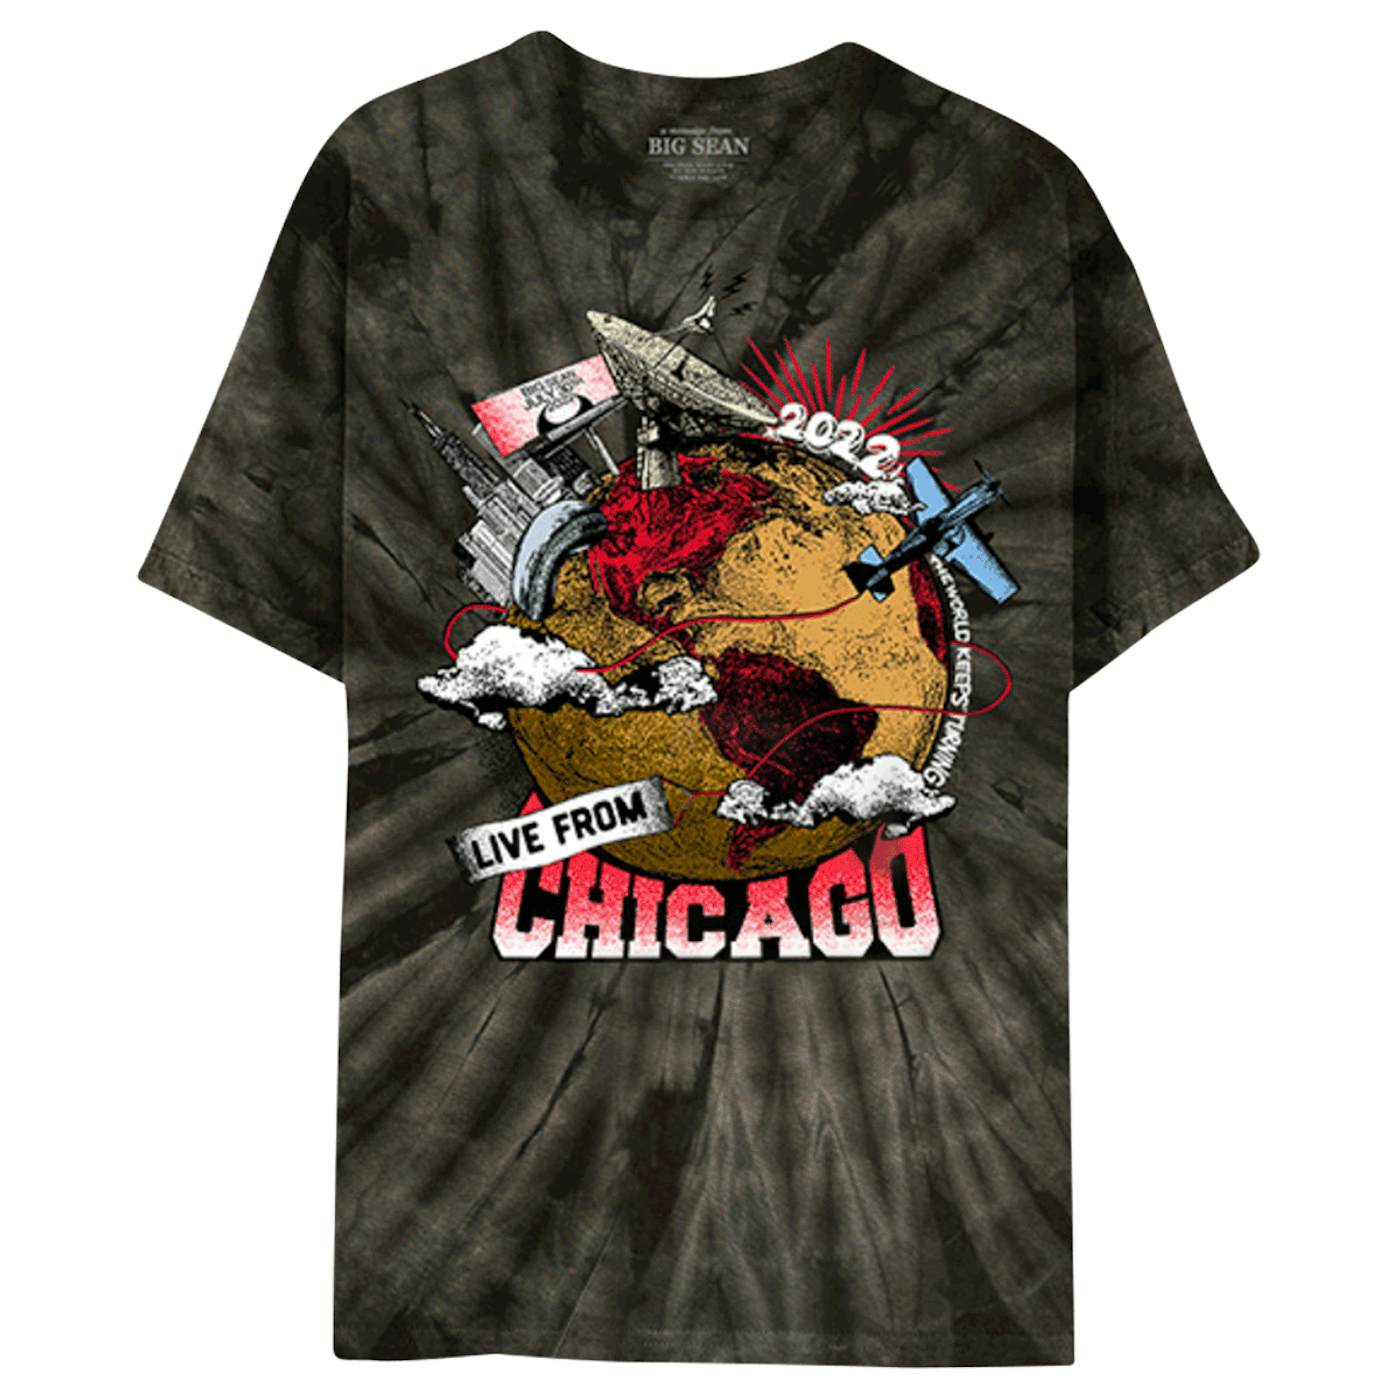 Big Sean Live From Chicago Tee